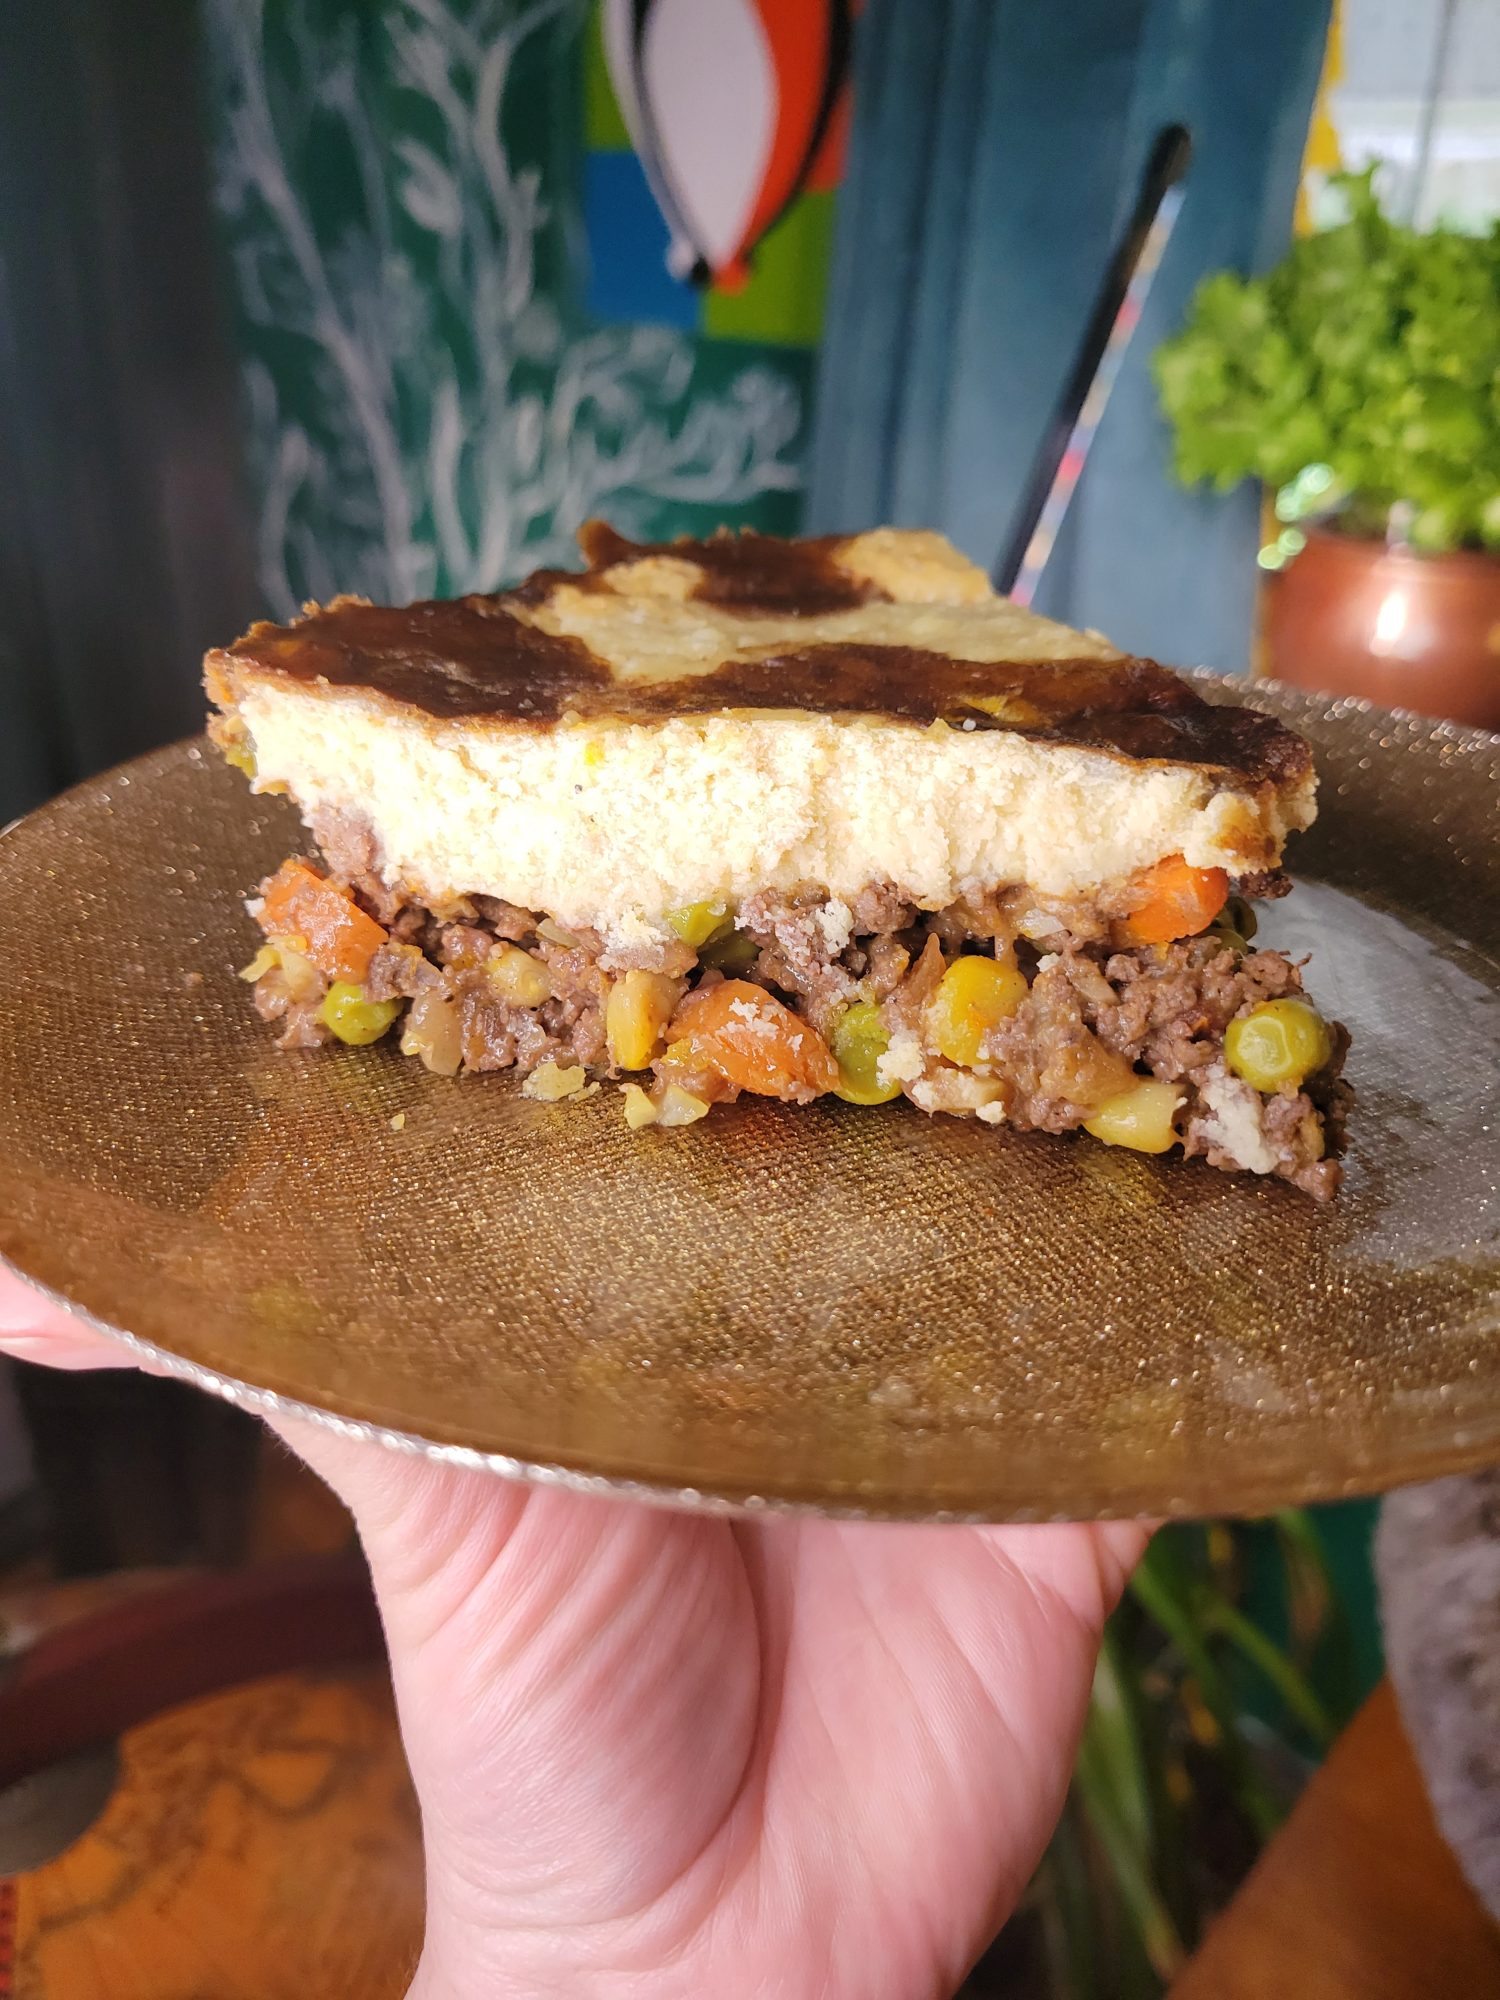 The Best Classic Shepherd's Pie - The Wholesome Dish